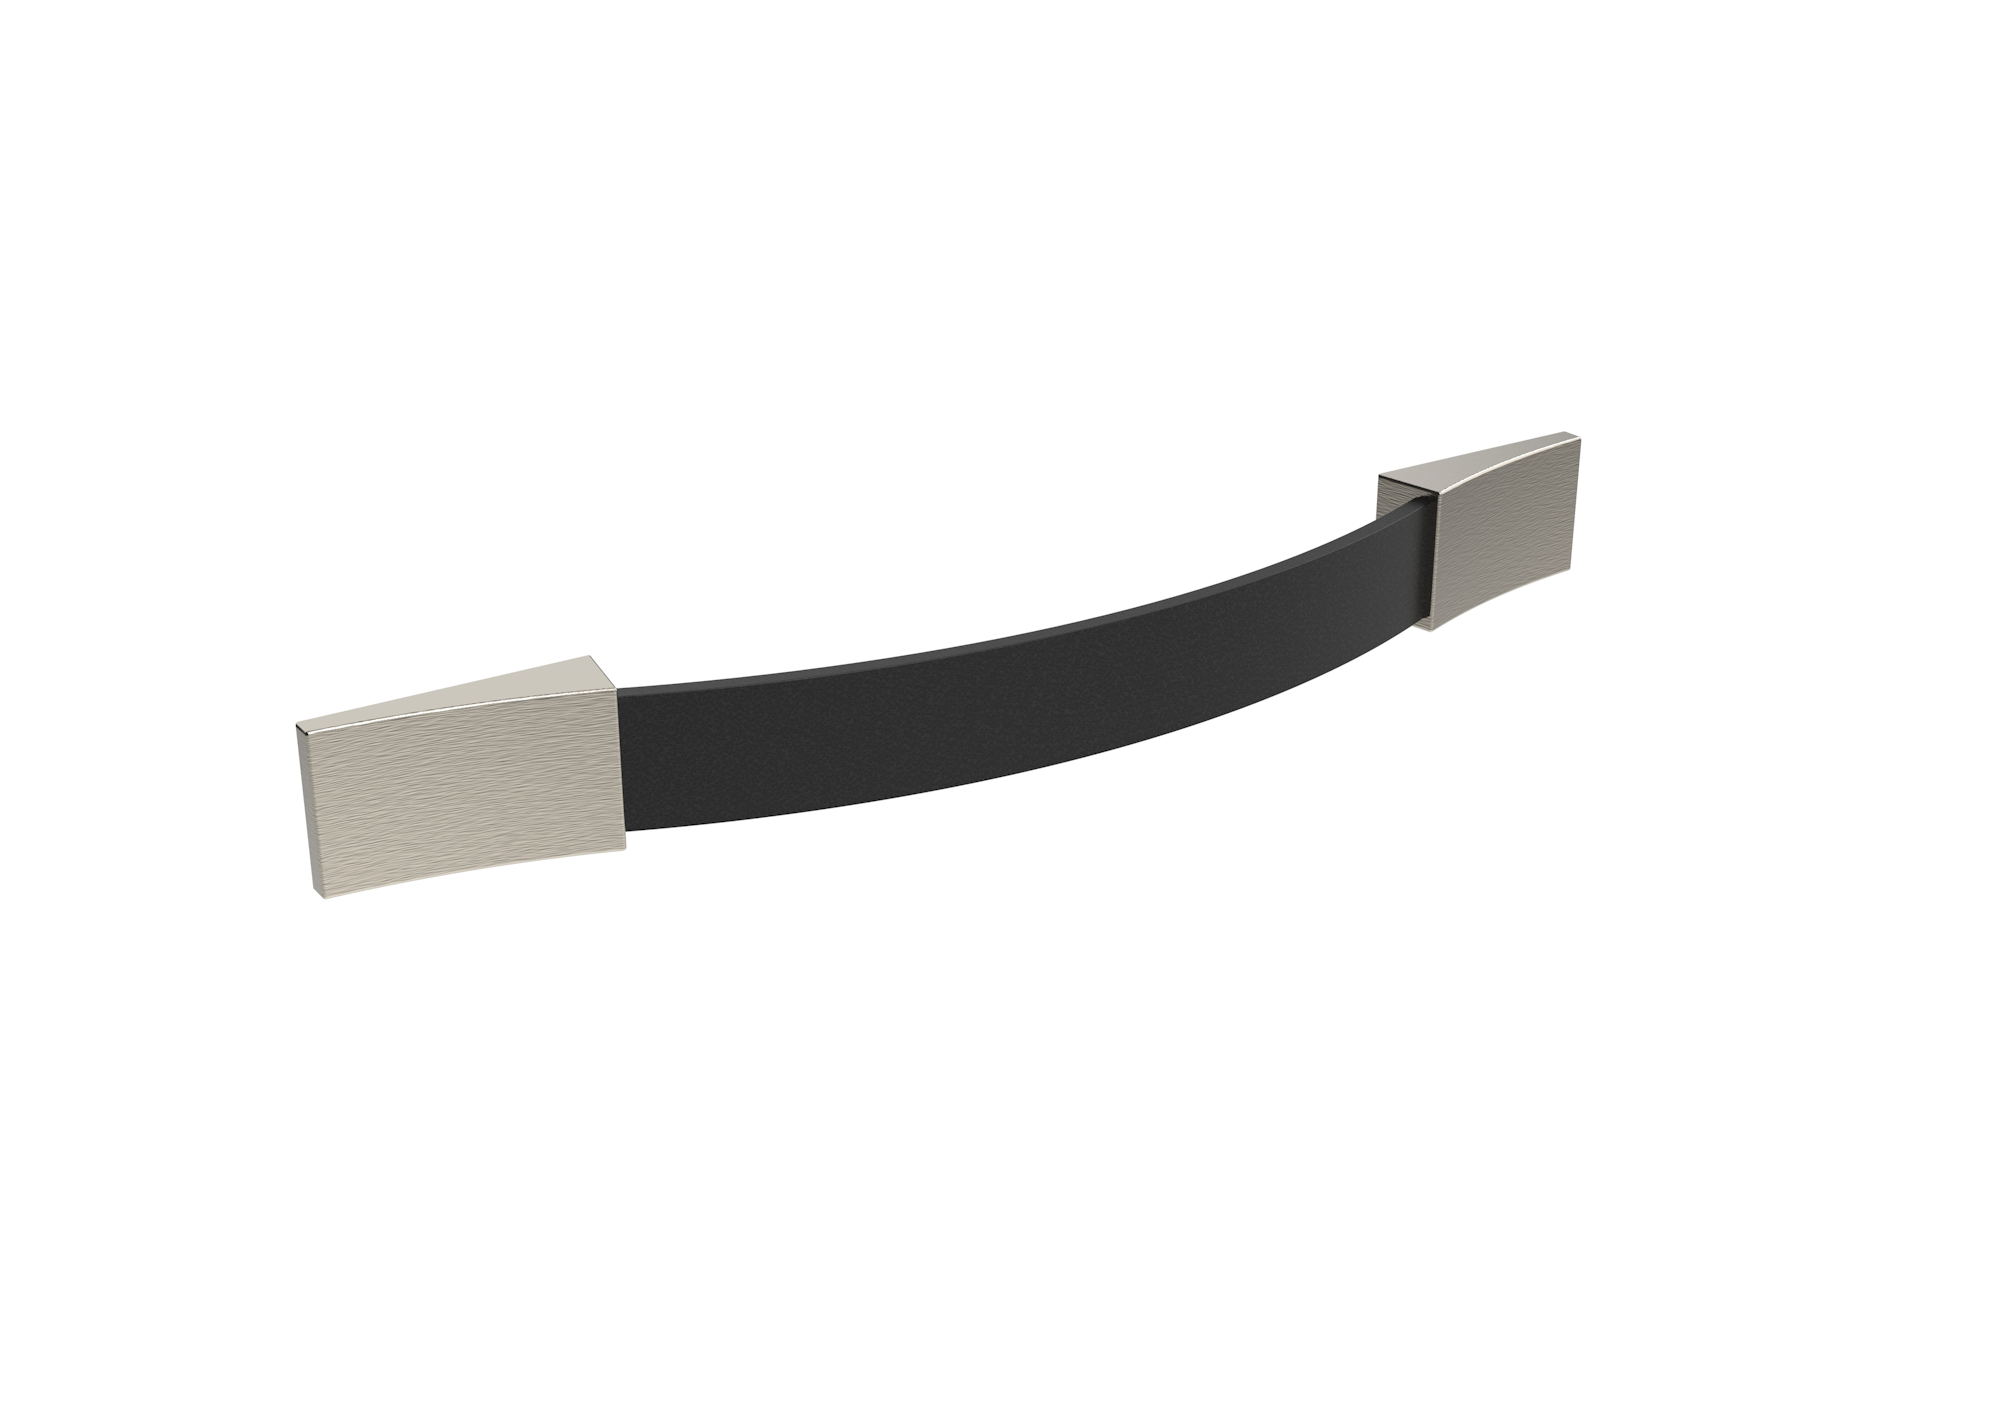 CAIRO 224mm handle - Black Leather - 160mm Centres